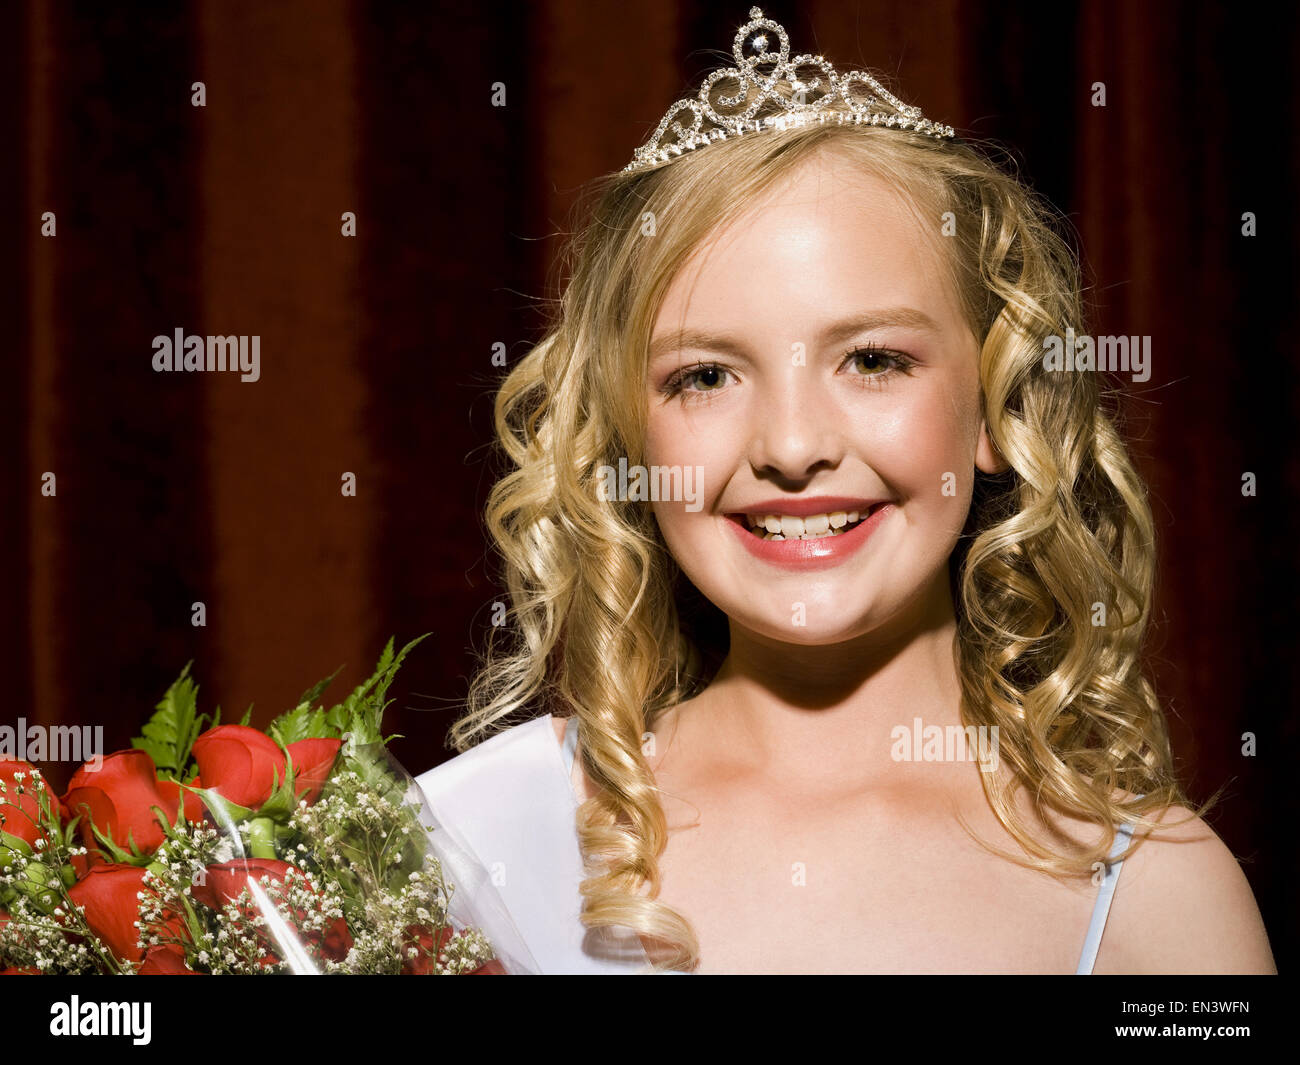 Beauty pageant winner smiling and holding roses Stock Photo